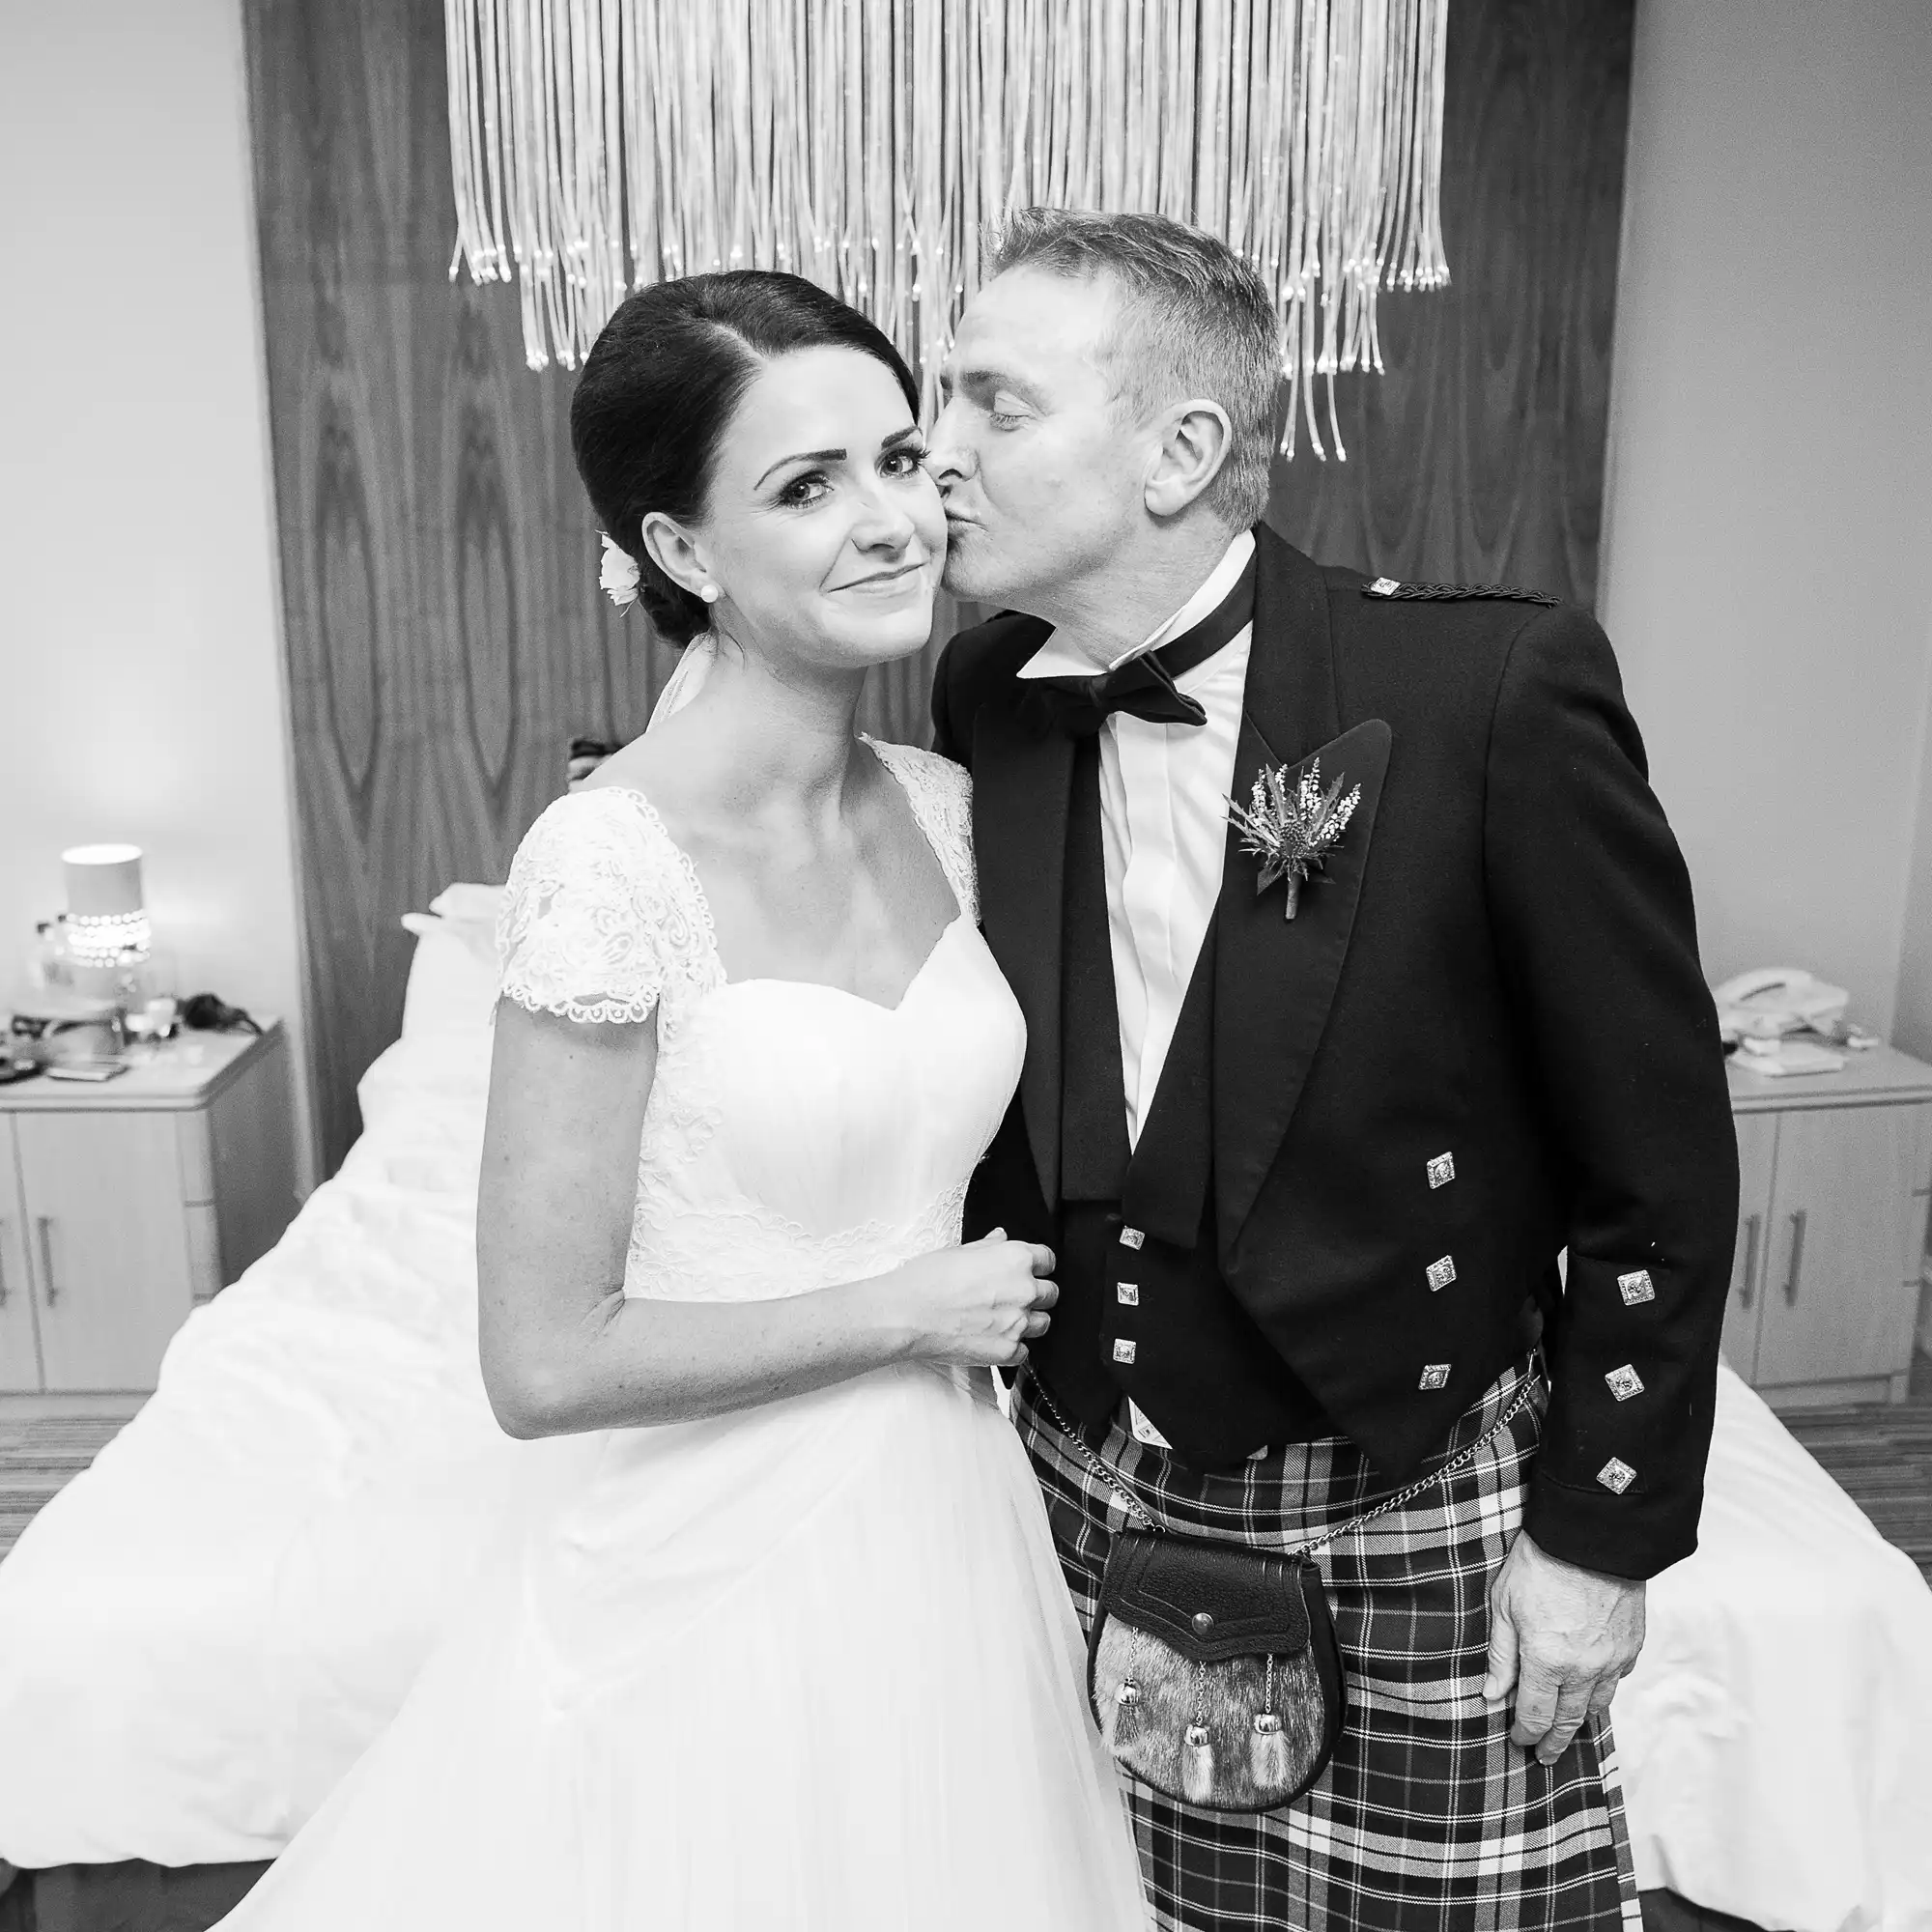 A man in a kilt kissing a bride on the cheek in a black and white wedding photo.